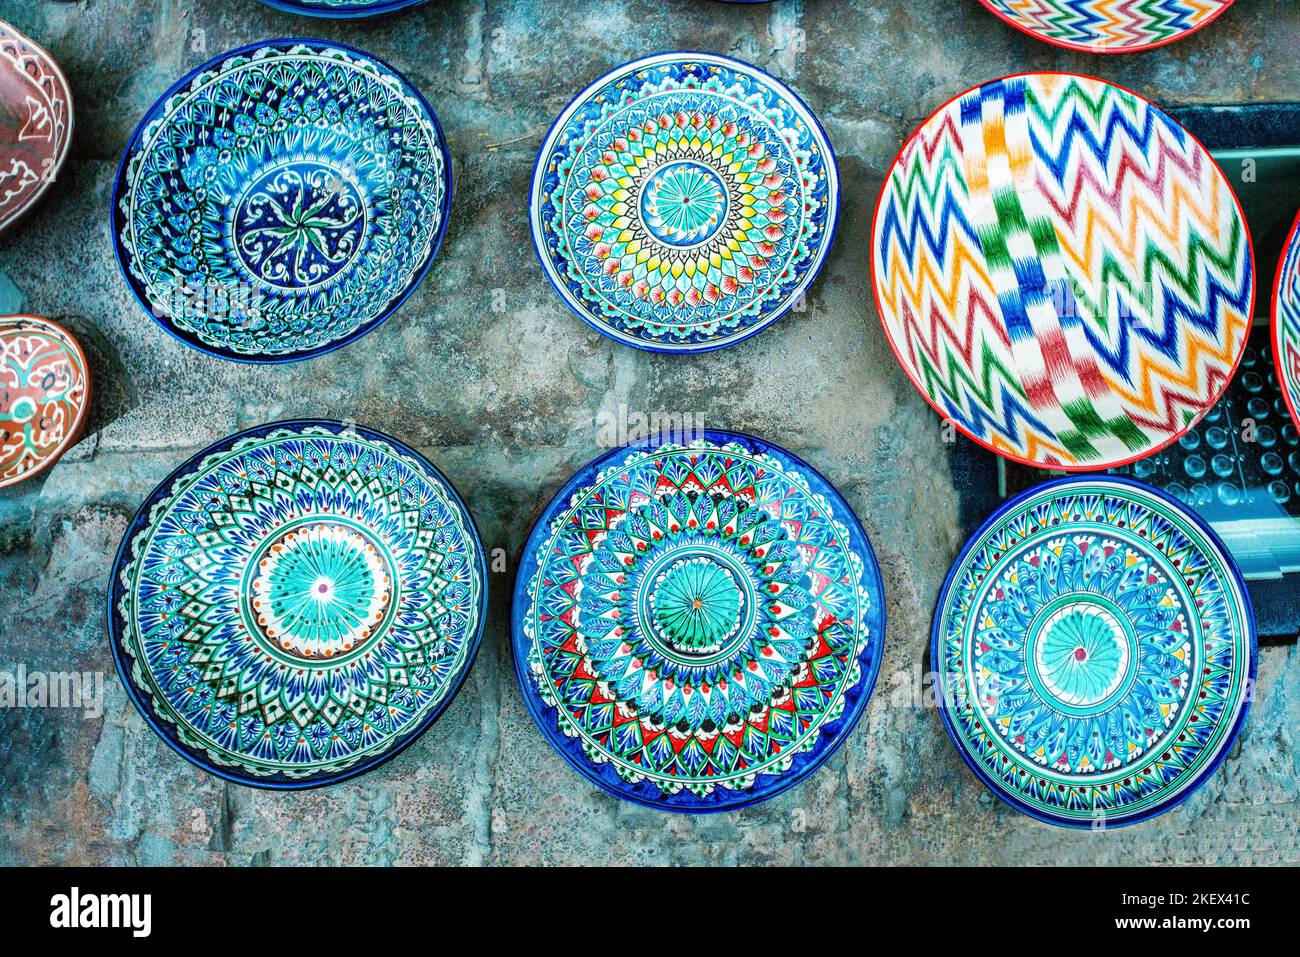 Typical plates in Uzbek style on concrete  floor in Old City Khiva Stock Photo